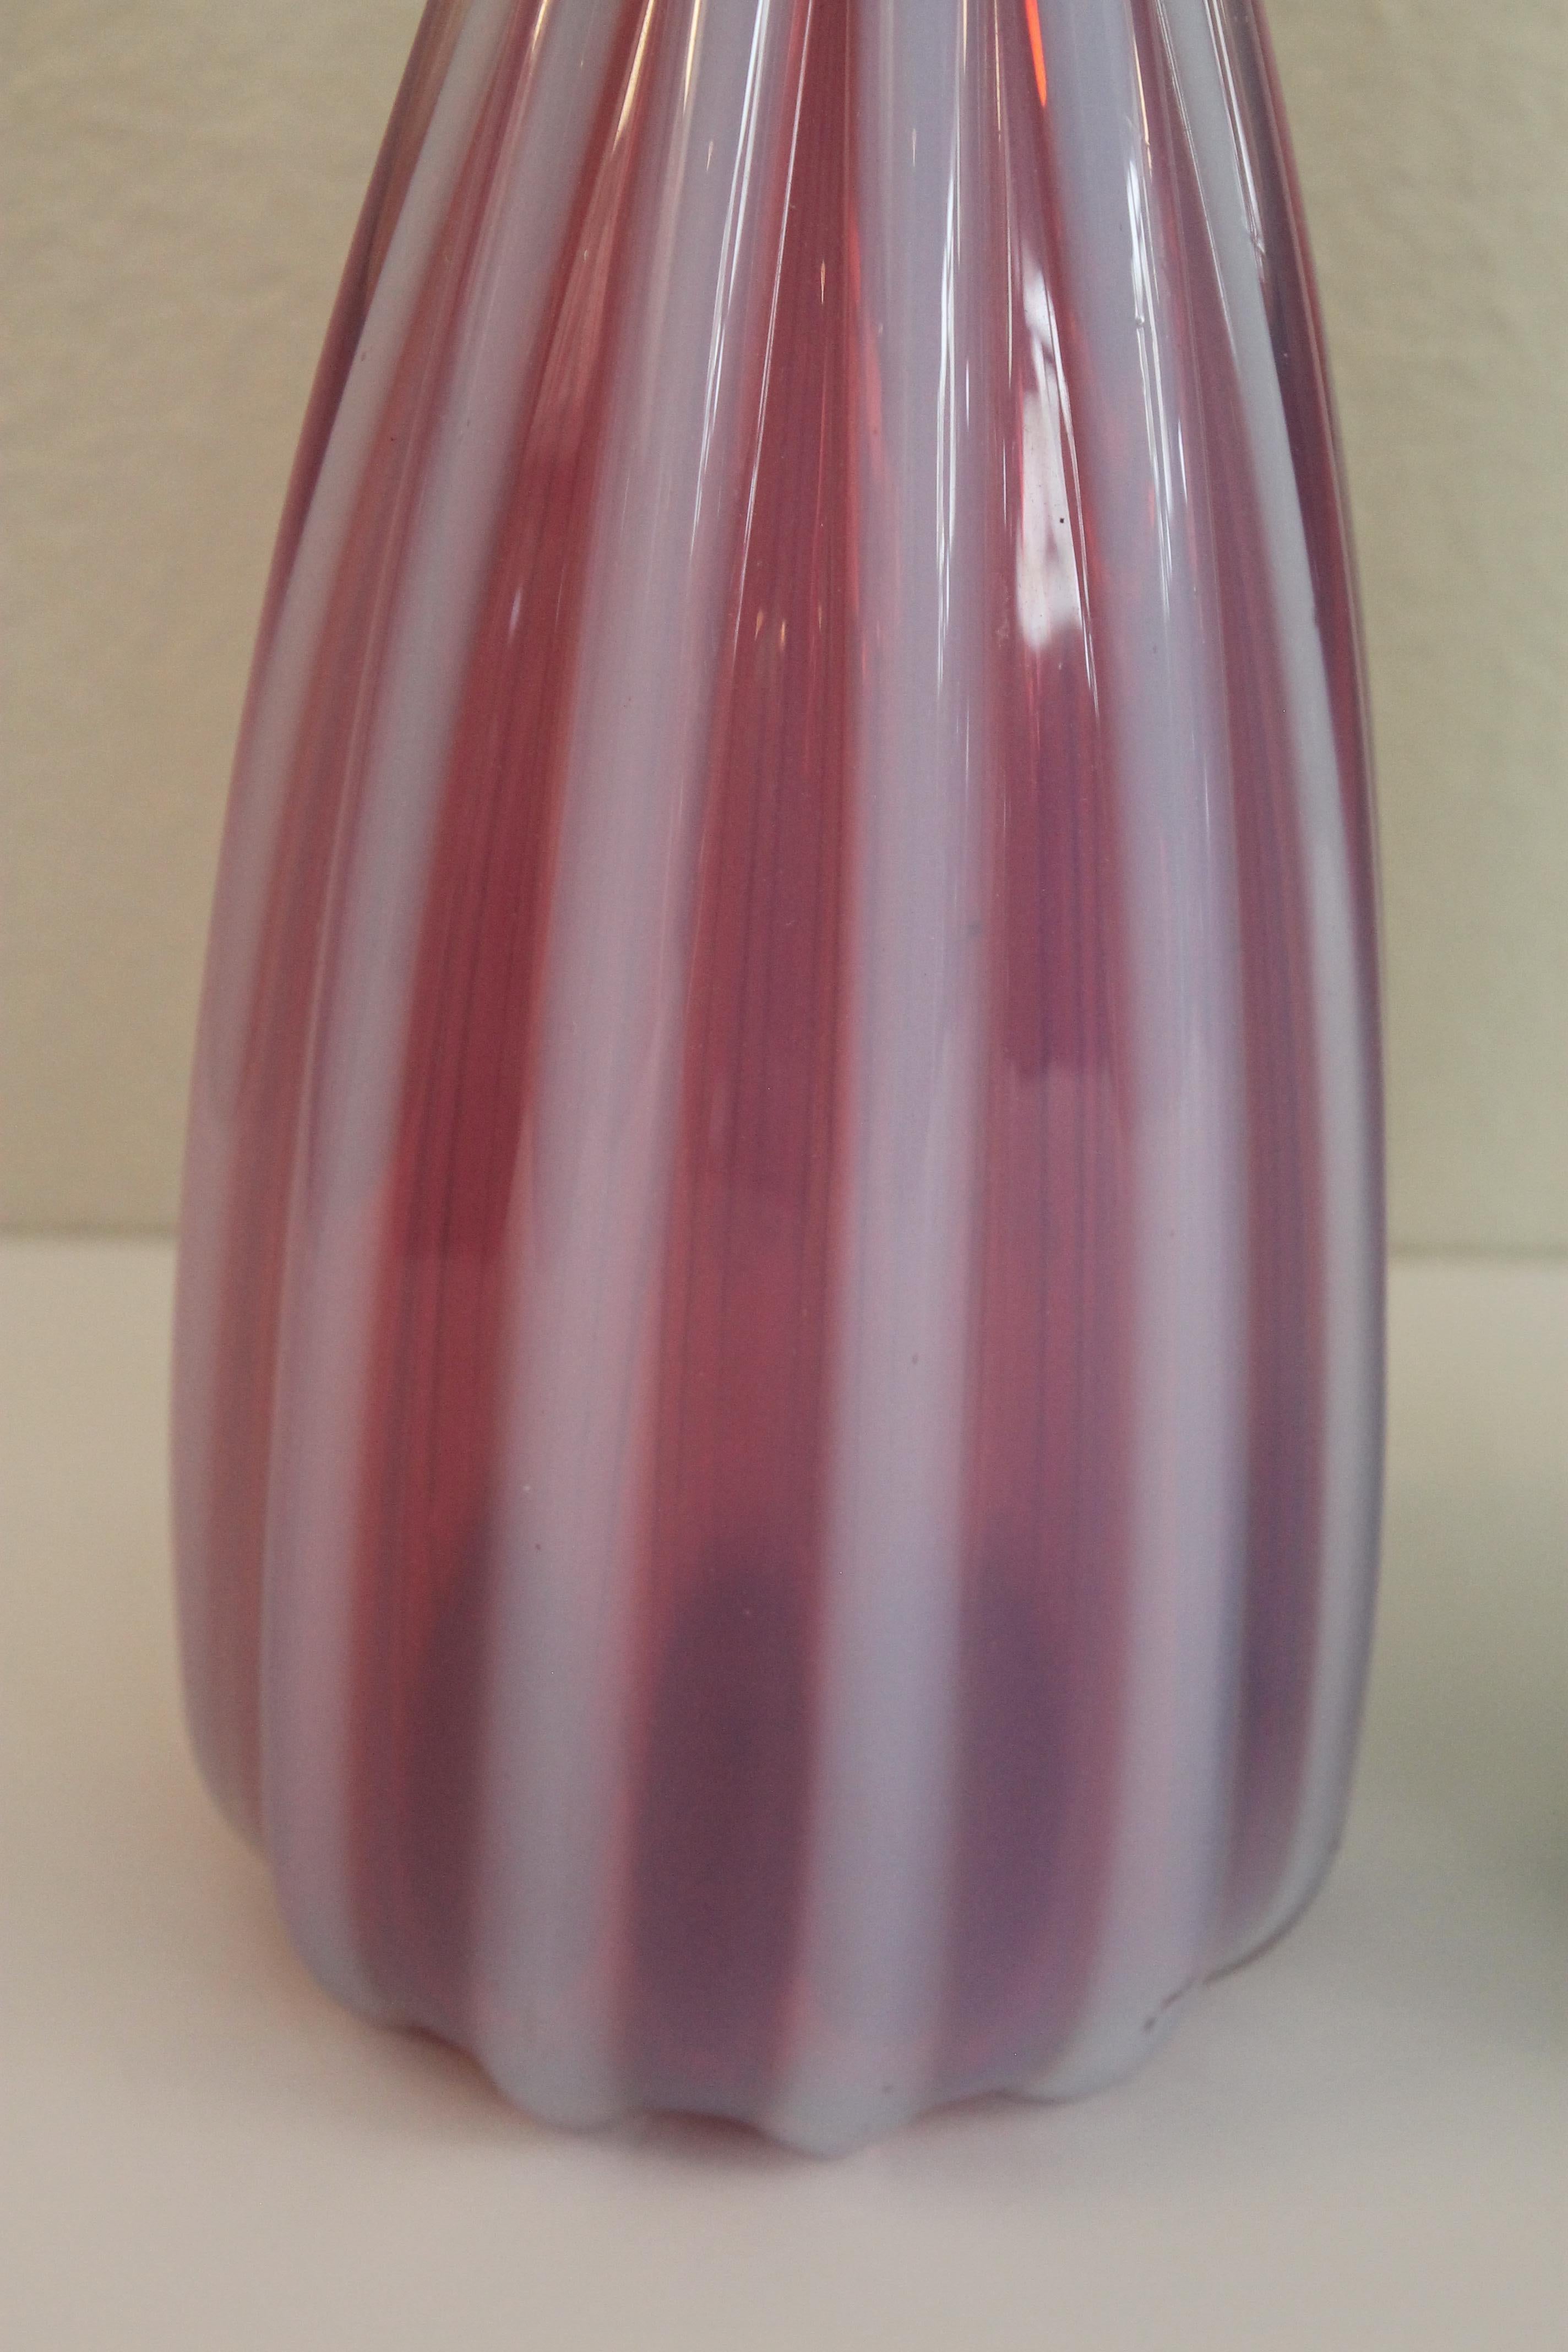 Pair of Murano Cranberry, Turquoise and Opaque Vases For Sale 1